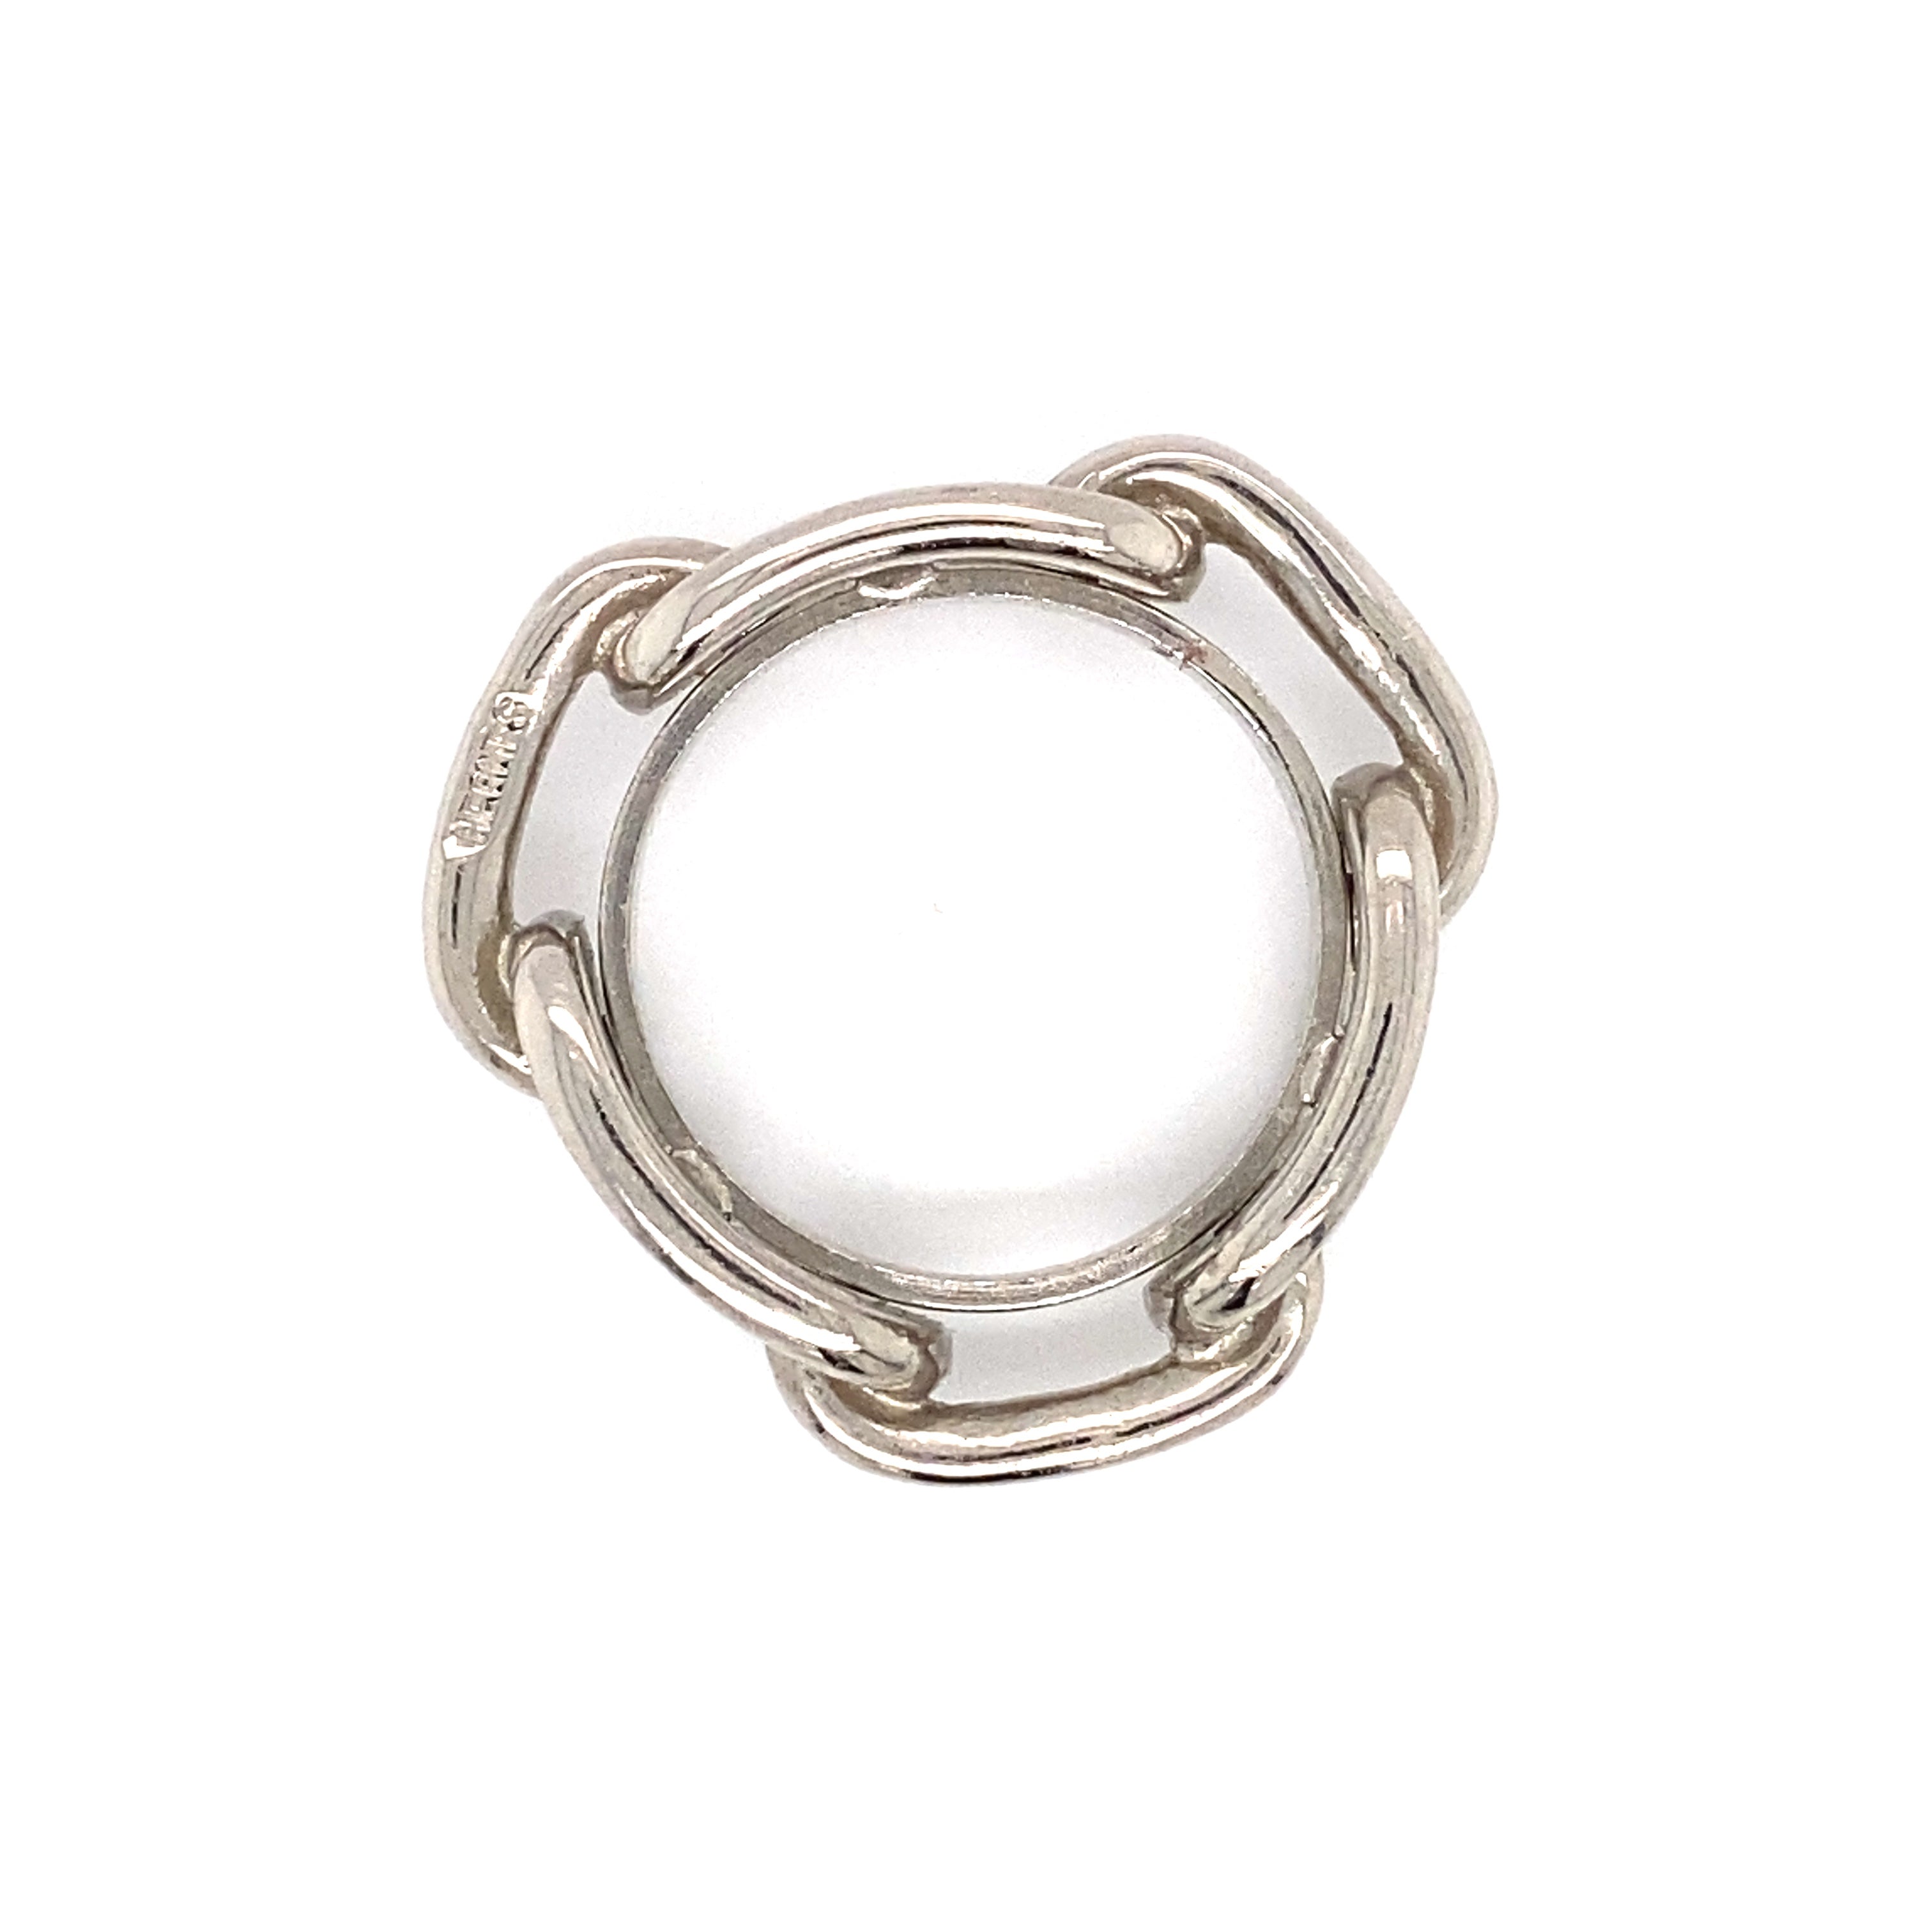  Scarf Ring Triangle Horsebit Ring, Horse shoe Scarf